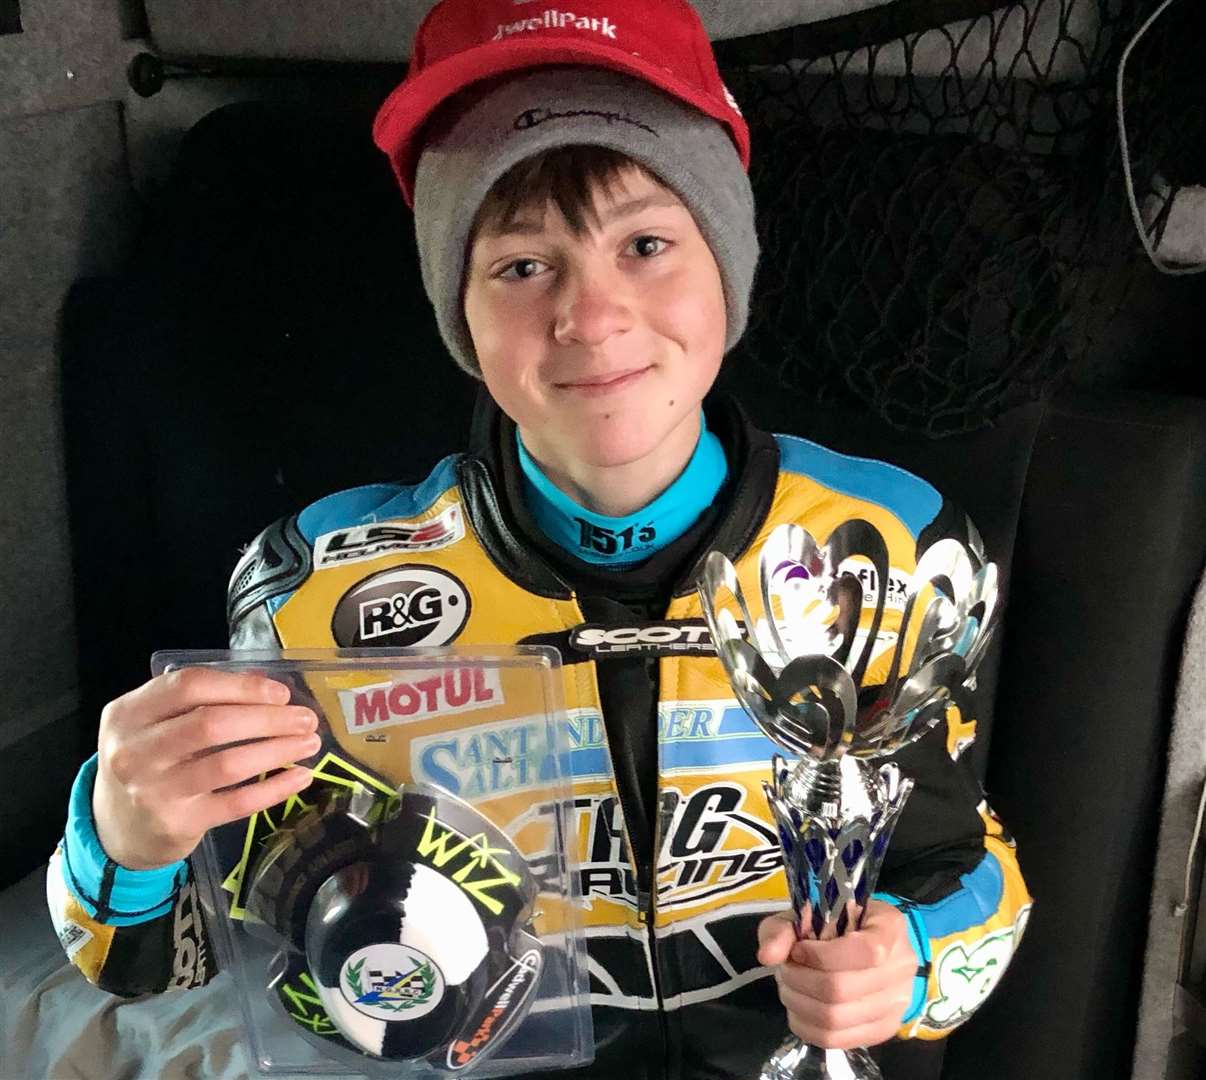 Finn Smart-Weeden with his ‘performance of the meeting’ award from round one of the NG Junior SuperSport championship held at Cadwell Park earlier this month